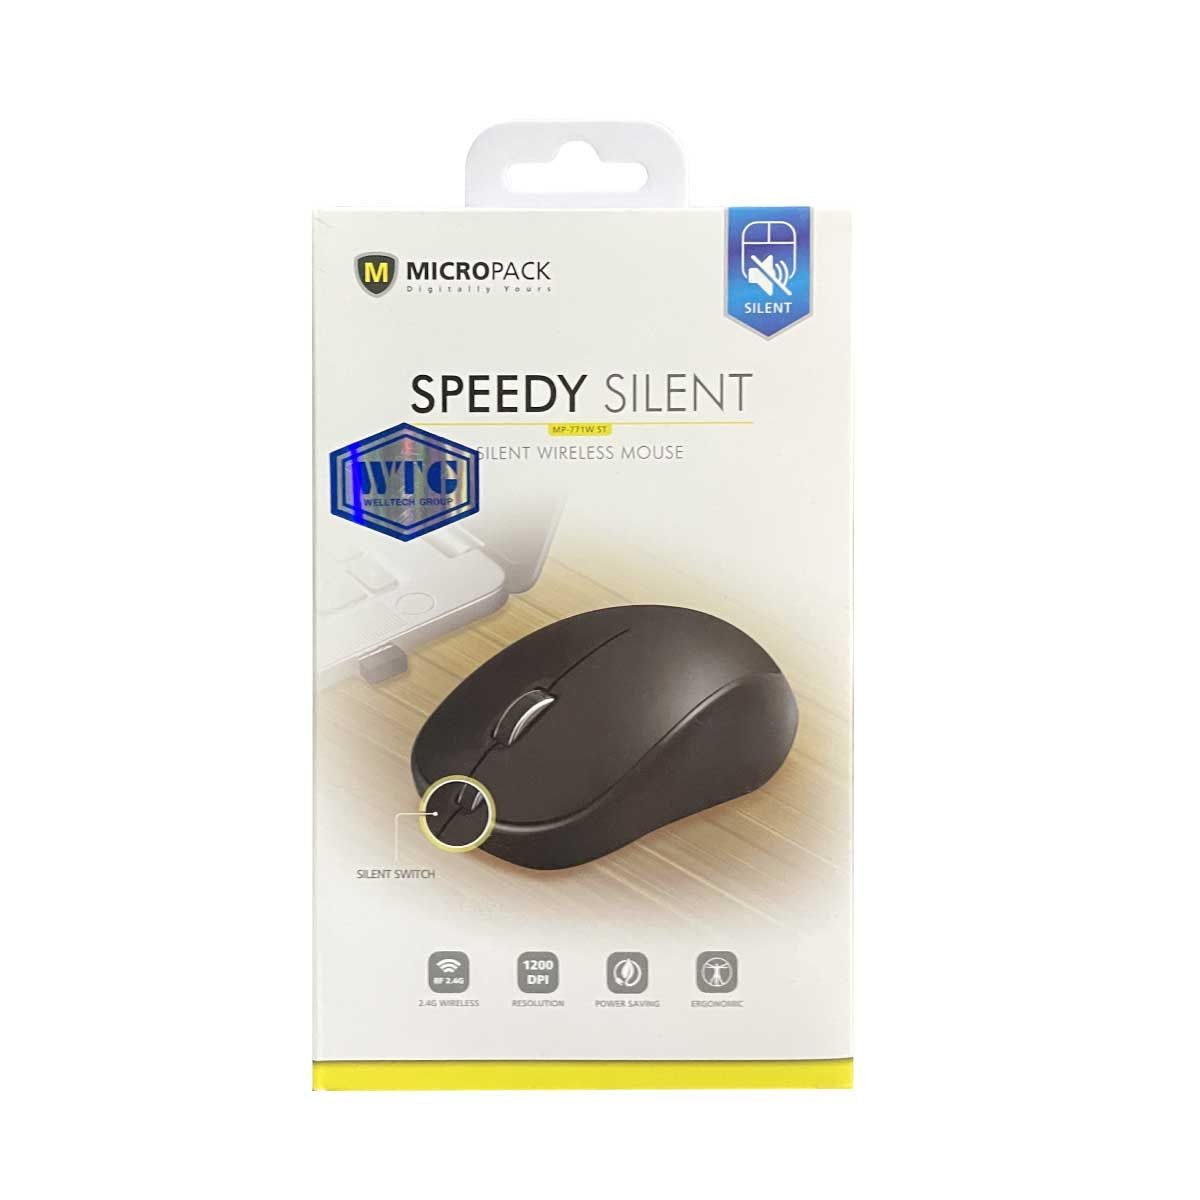 MOUSE (เมาส์ไร้สาย) MICROPACK MP-771W ST WIRELESS SILENT MOUSE (BLACK)